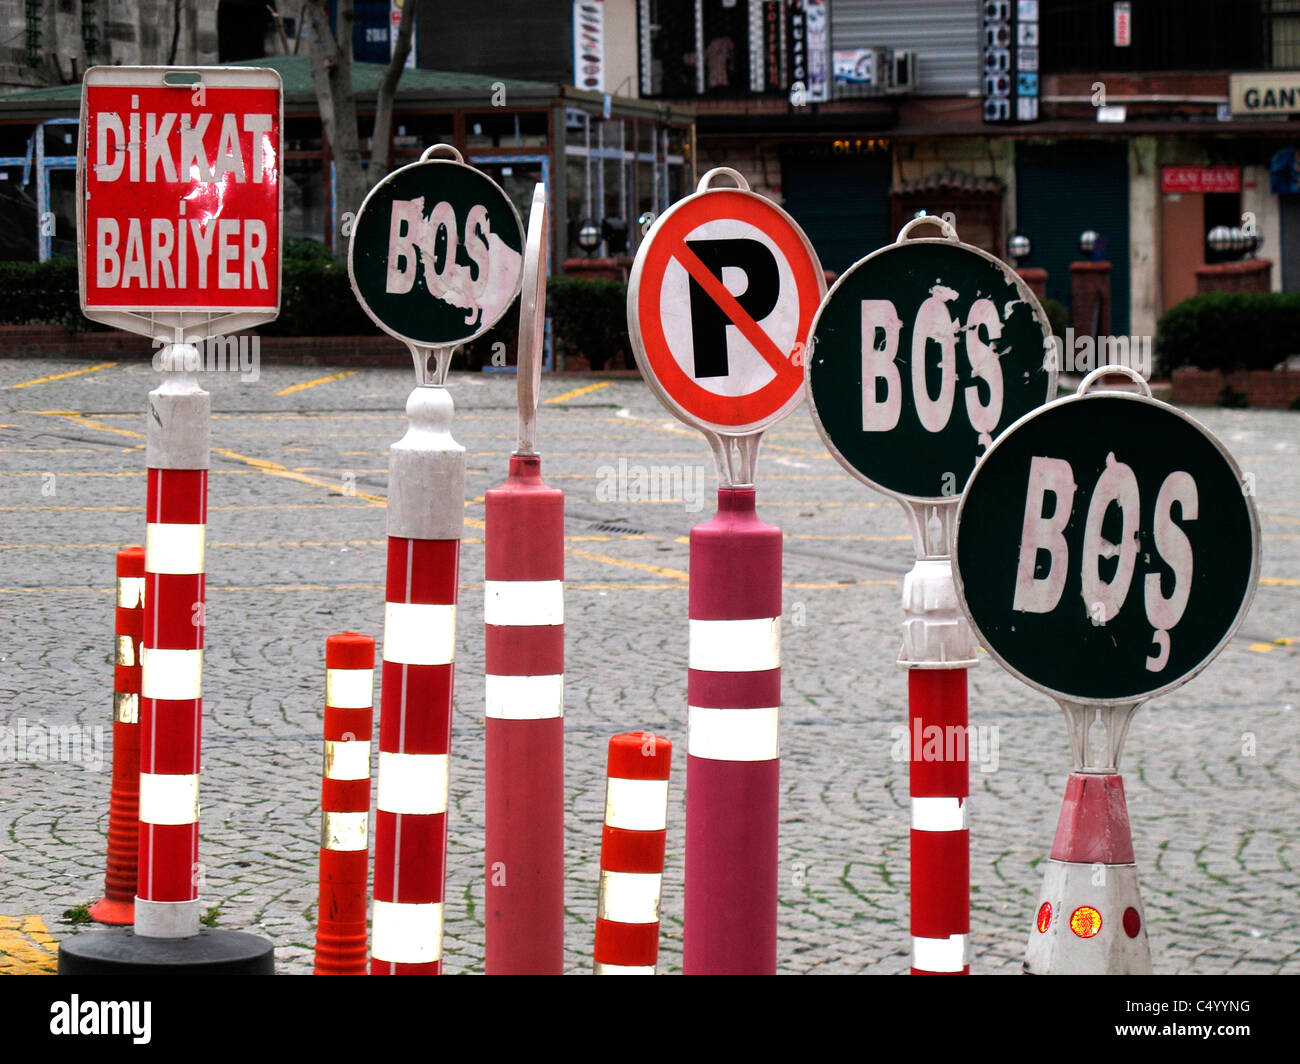 Turkey Istanbul Sultanahmet old town traffic signs Stock Photo